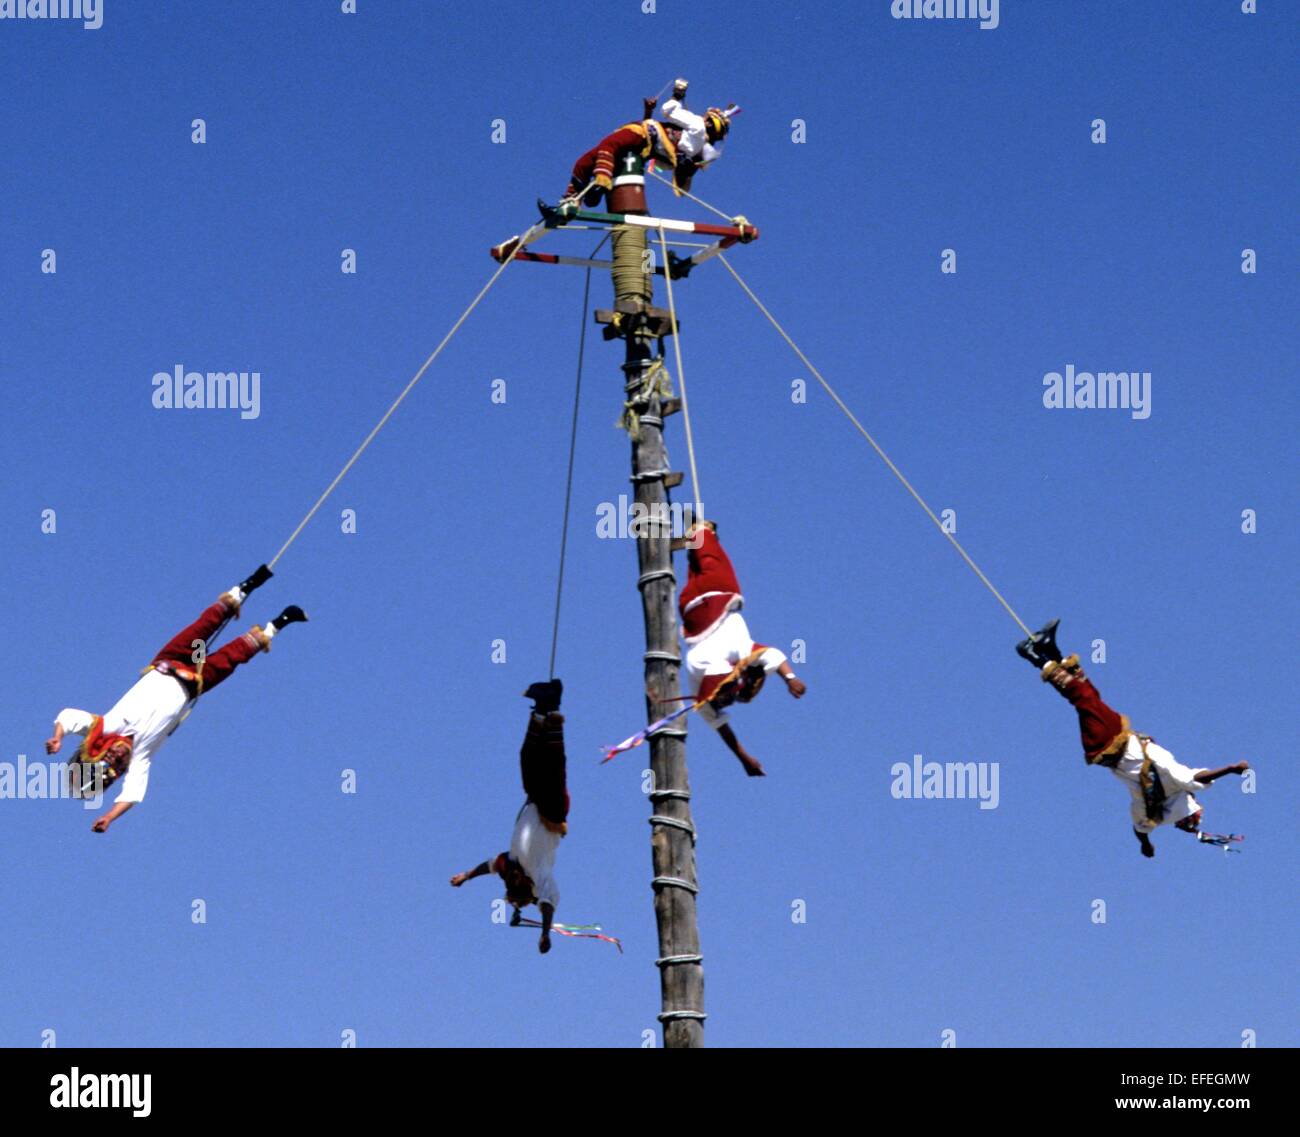 Mexico - Totonac Indians perform intricate weaving dance routines on top of a pole nearly 100 feet up in the air. Stock Photo